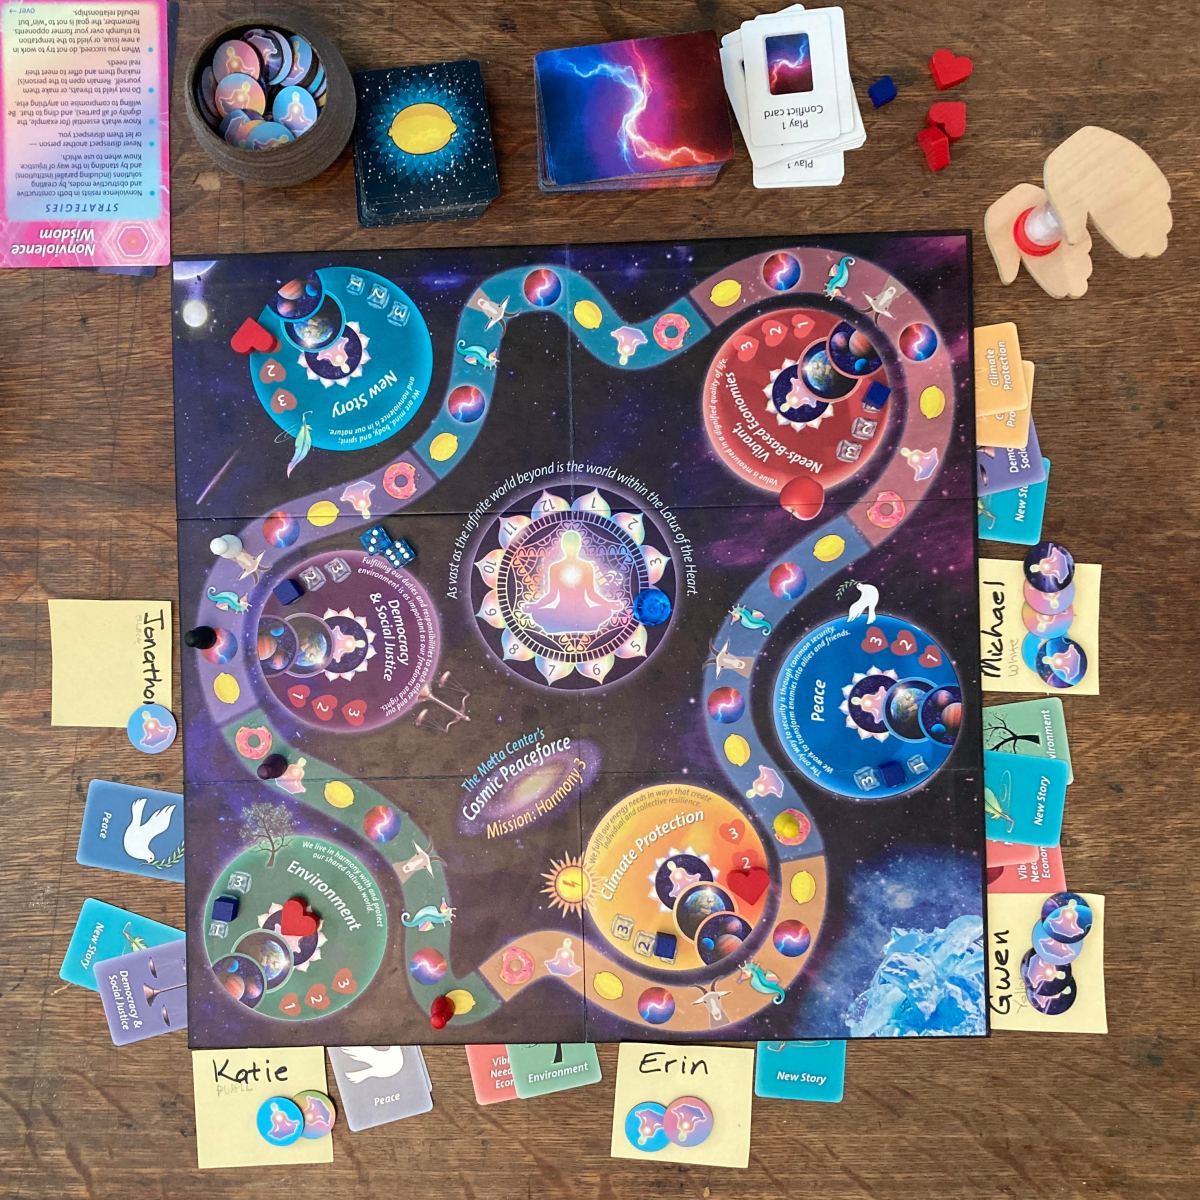 On Sale Until October 2nd: “Cosmic Peaceforce” a Collaborative Strategy Board Game